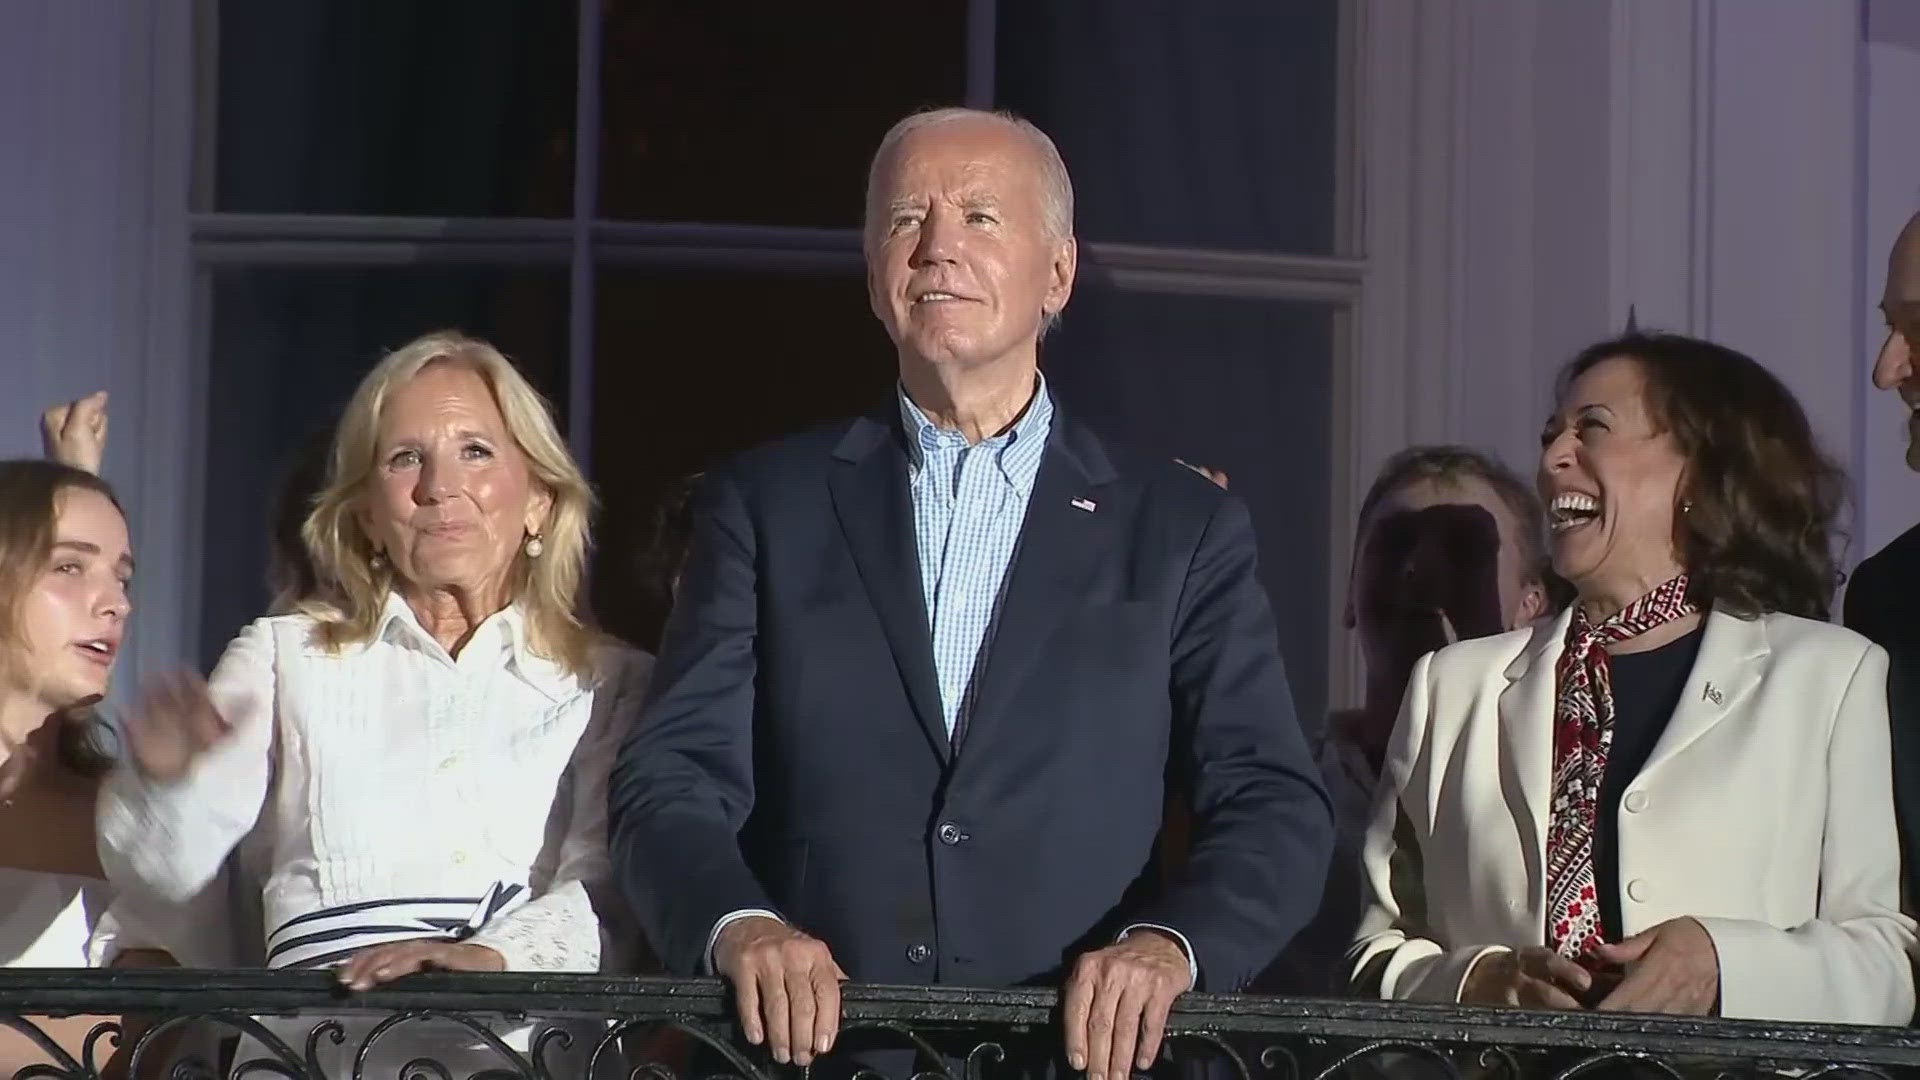 The Biden Administration released a new plan which includes $50 million in campaign ads.